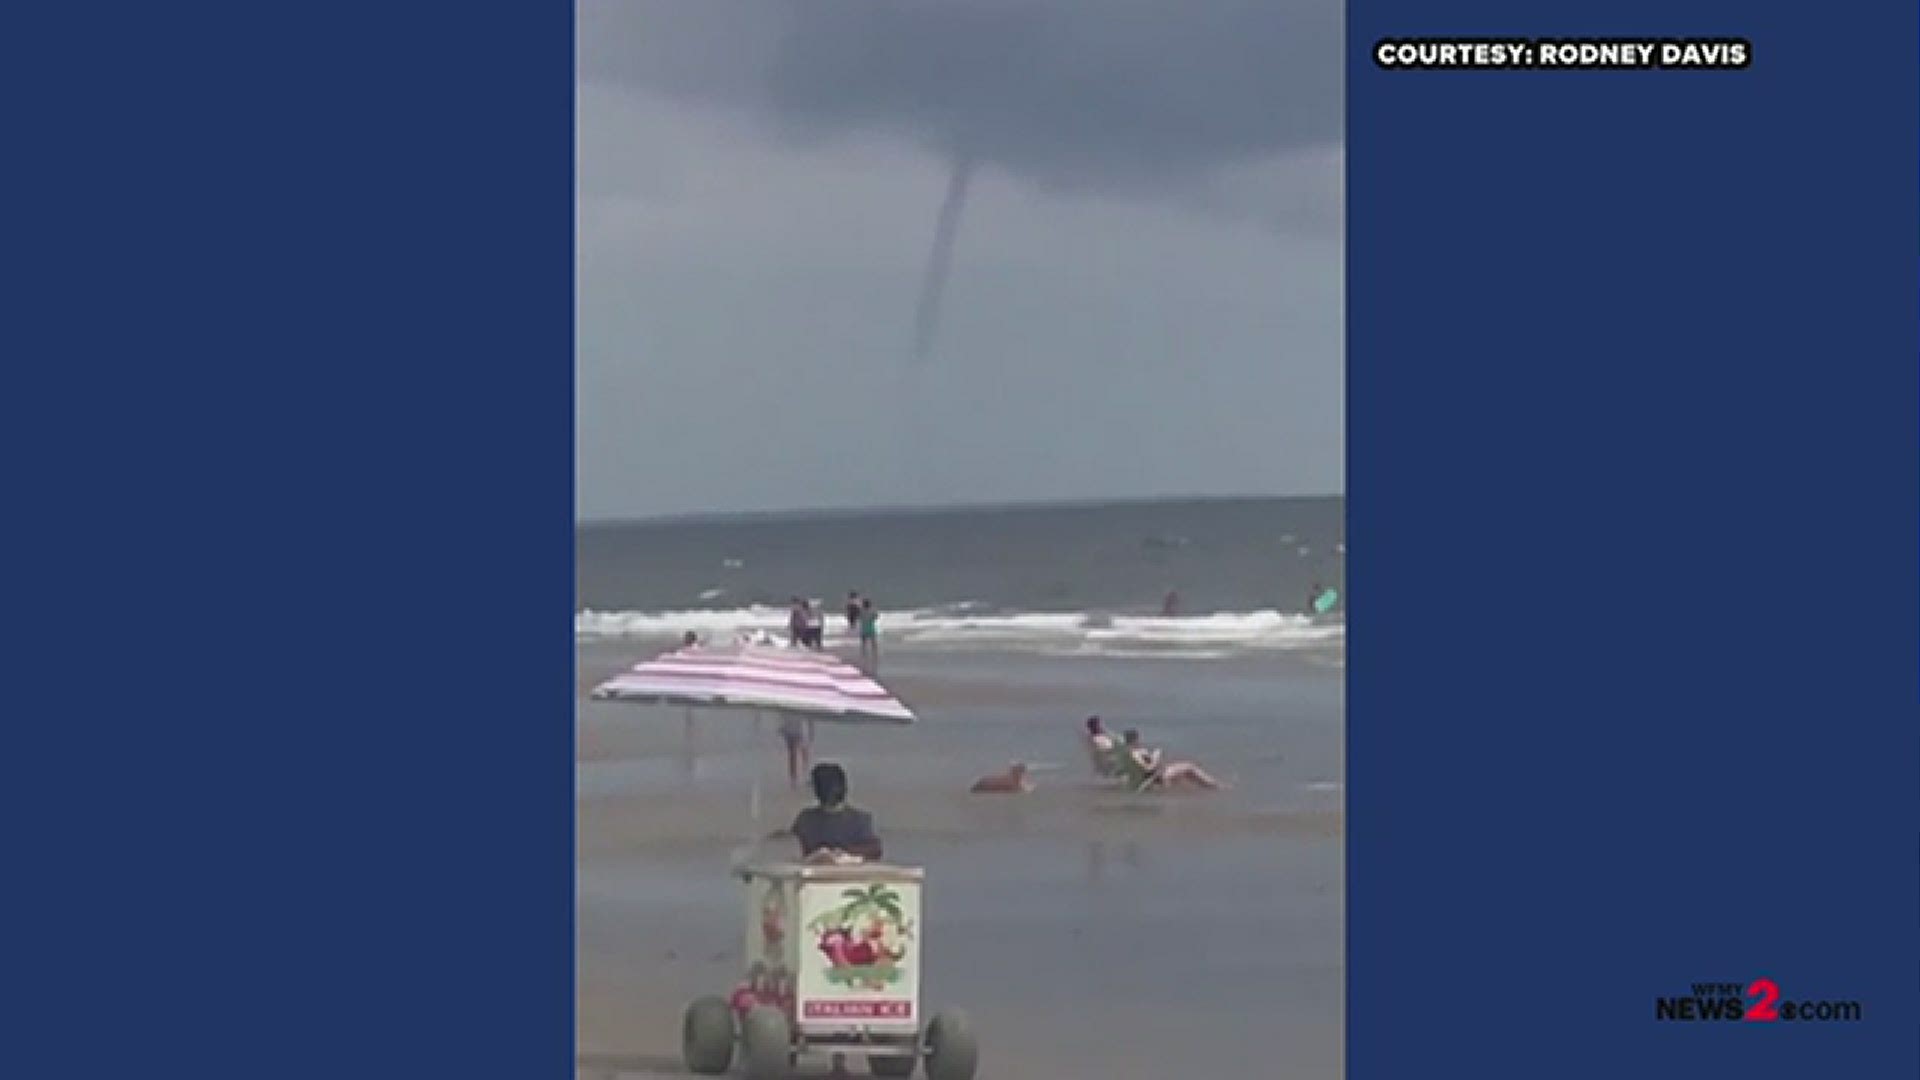 Check out this waterspout captured on video in Oak Island. The waterspout lasted for about 20 minutes and did not come ashore.